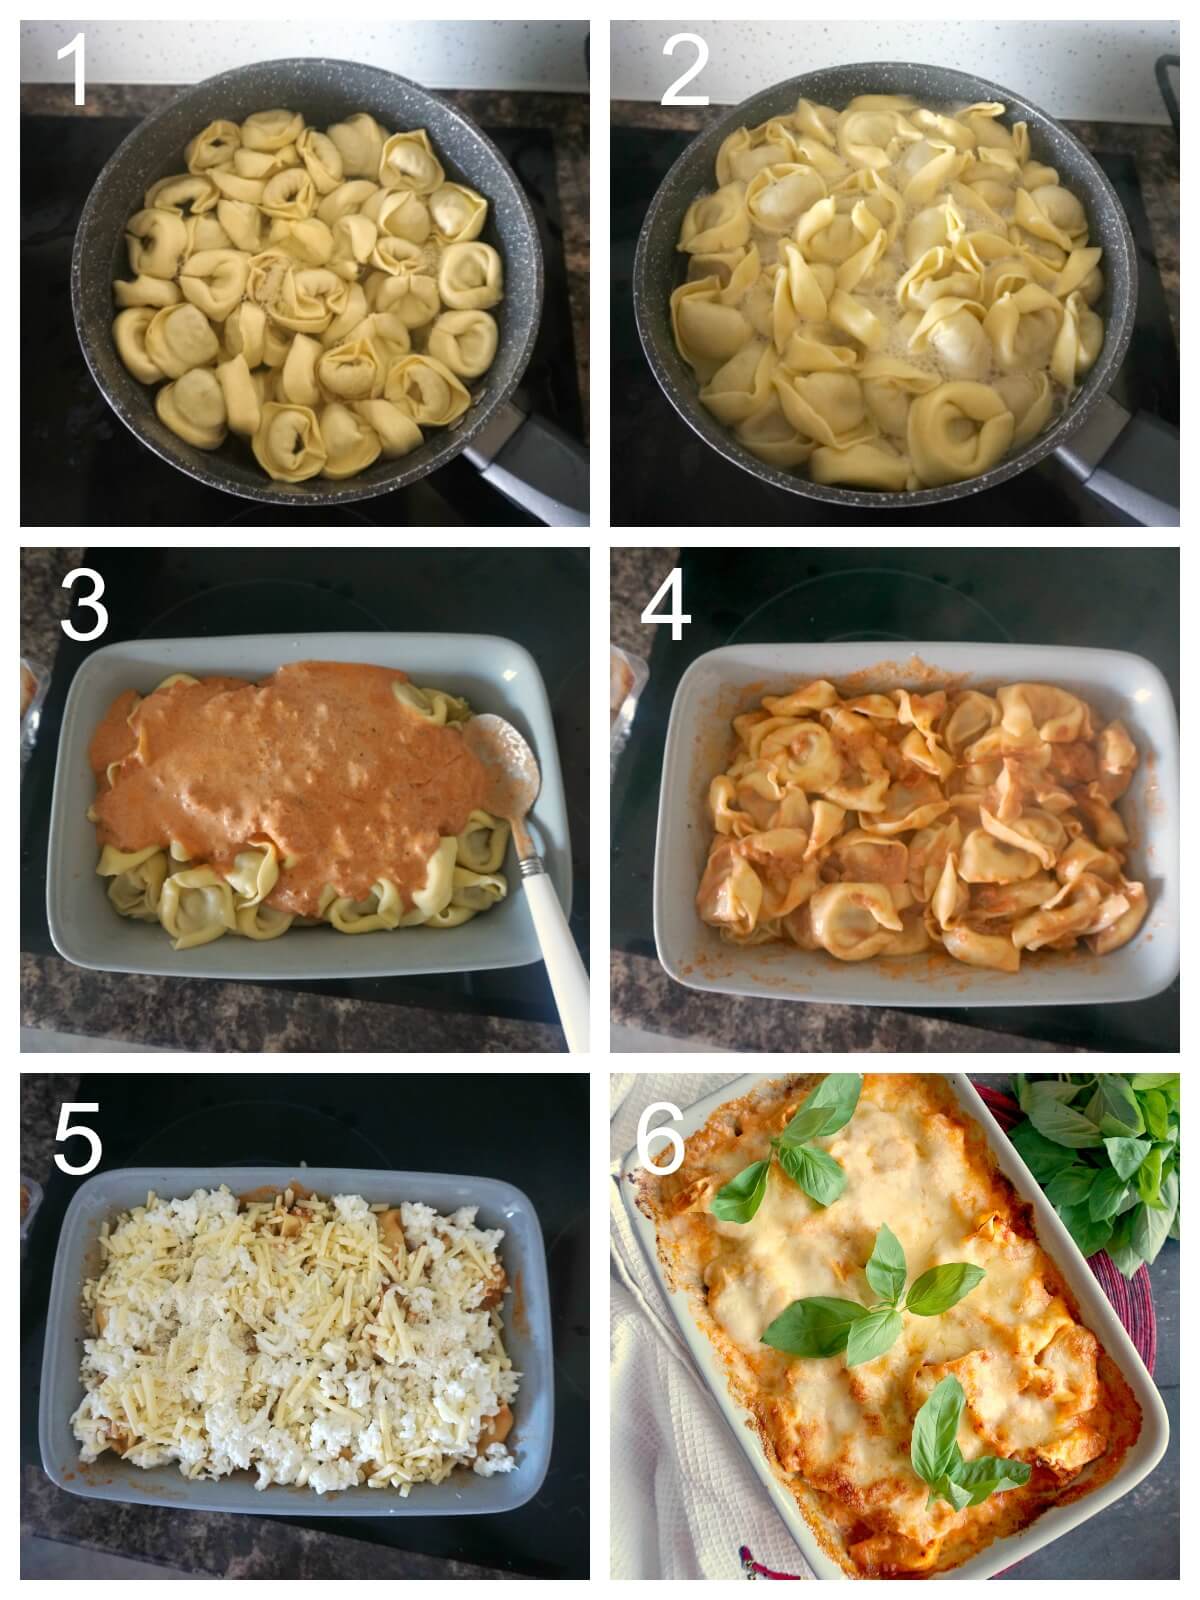 Collage of 6 photos to show how to make baked tortellini.